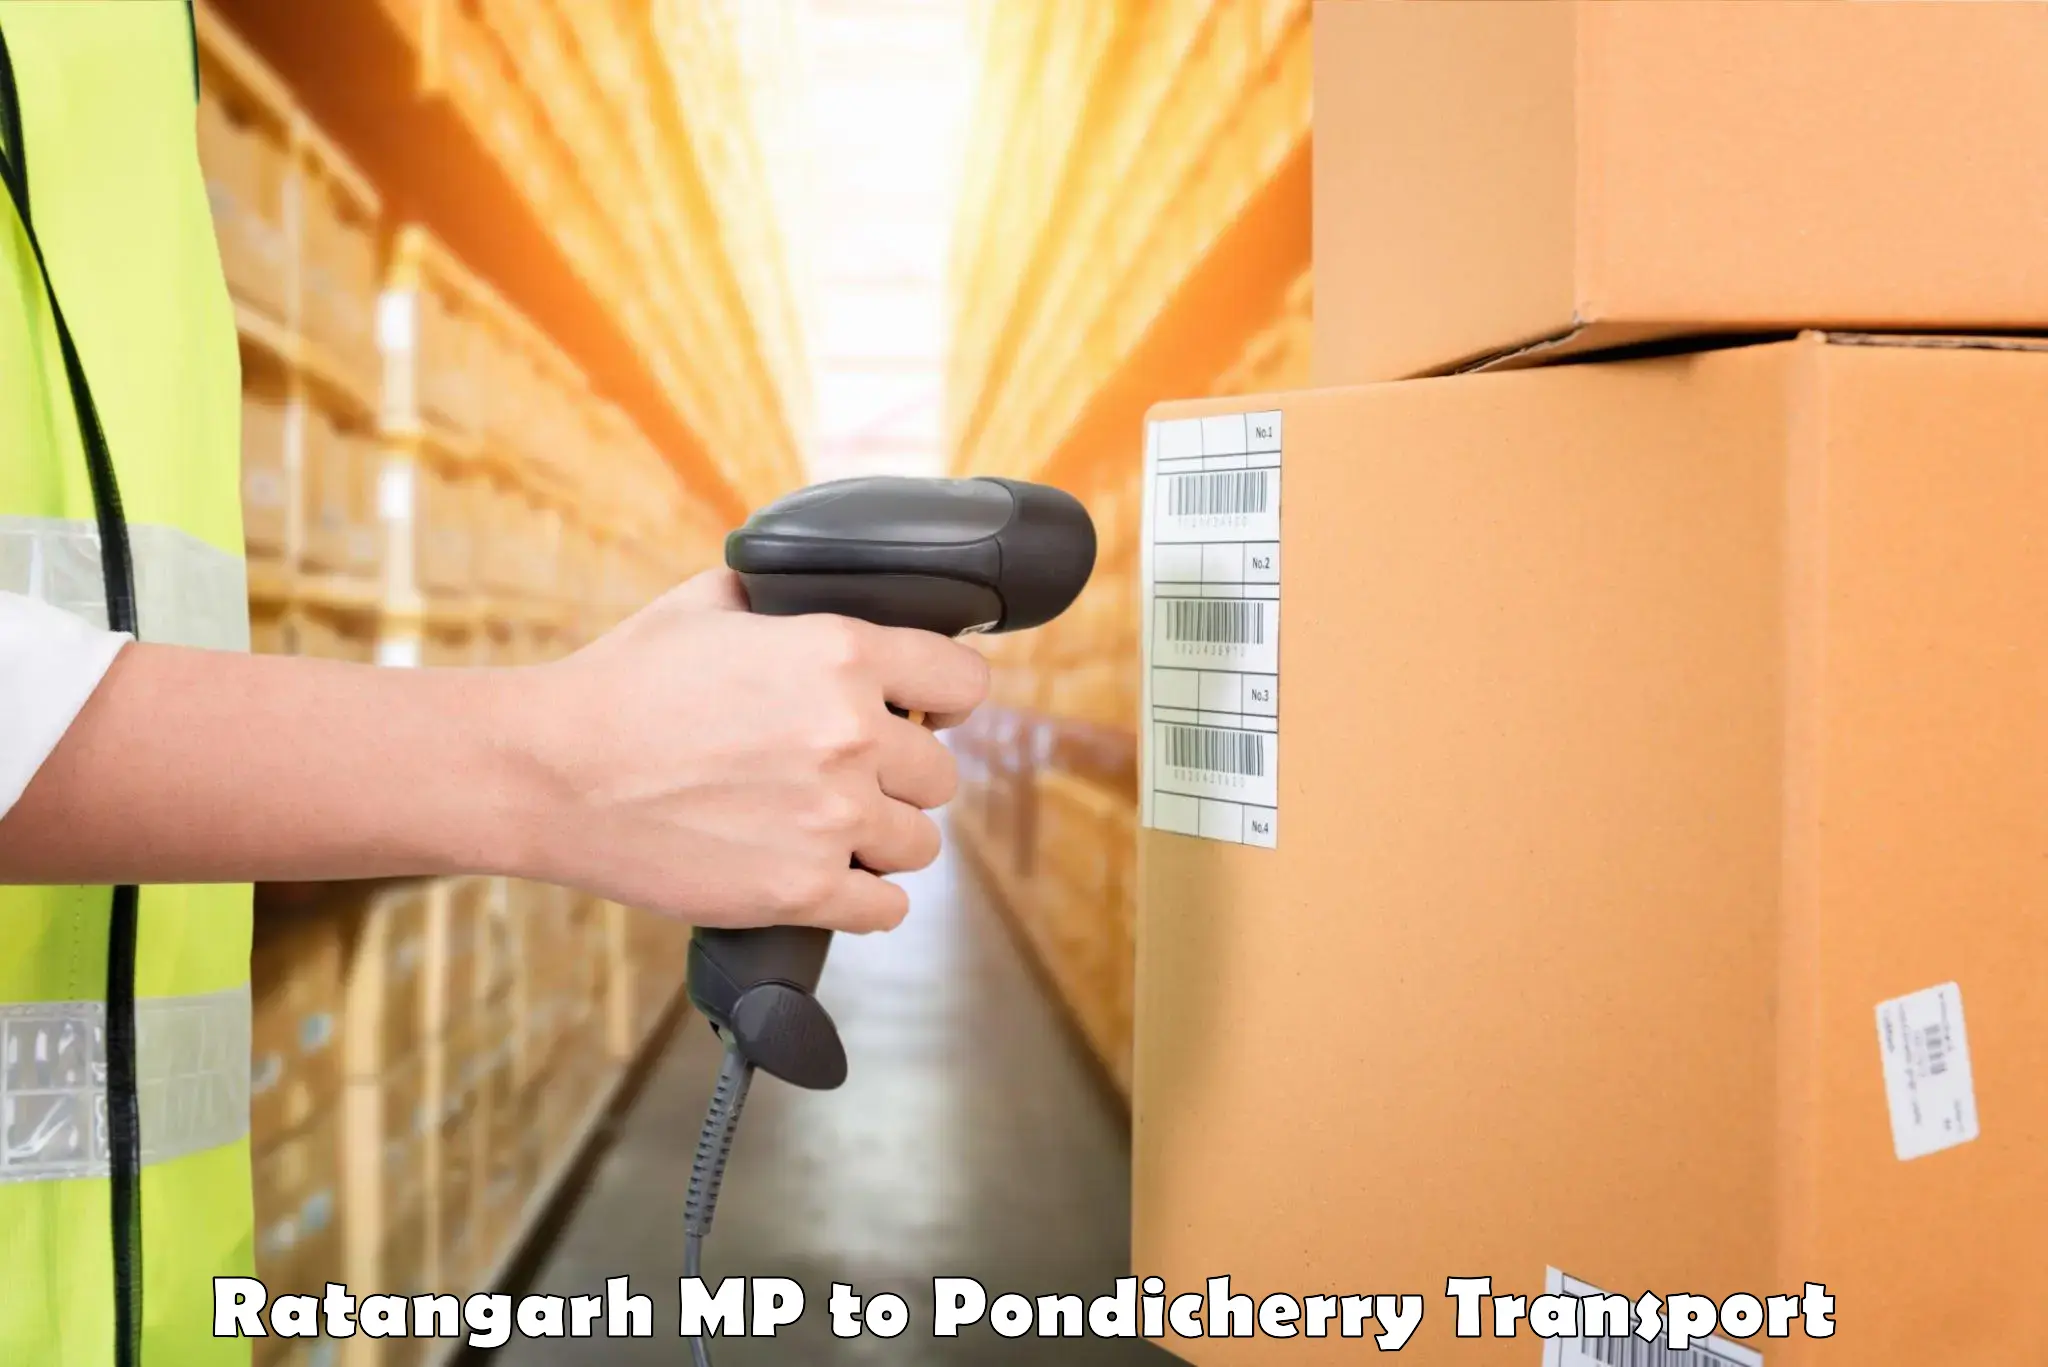 Commercial transport service Ratangarh MP to Metttupalayam